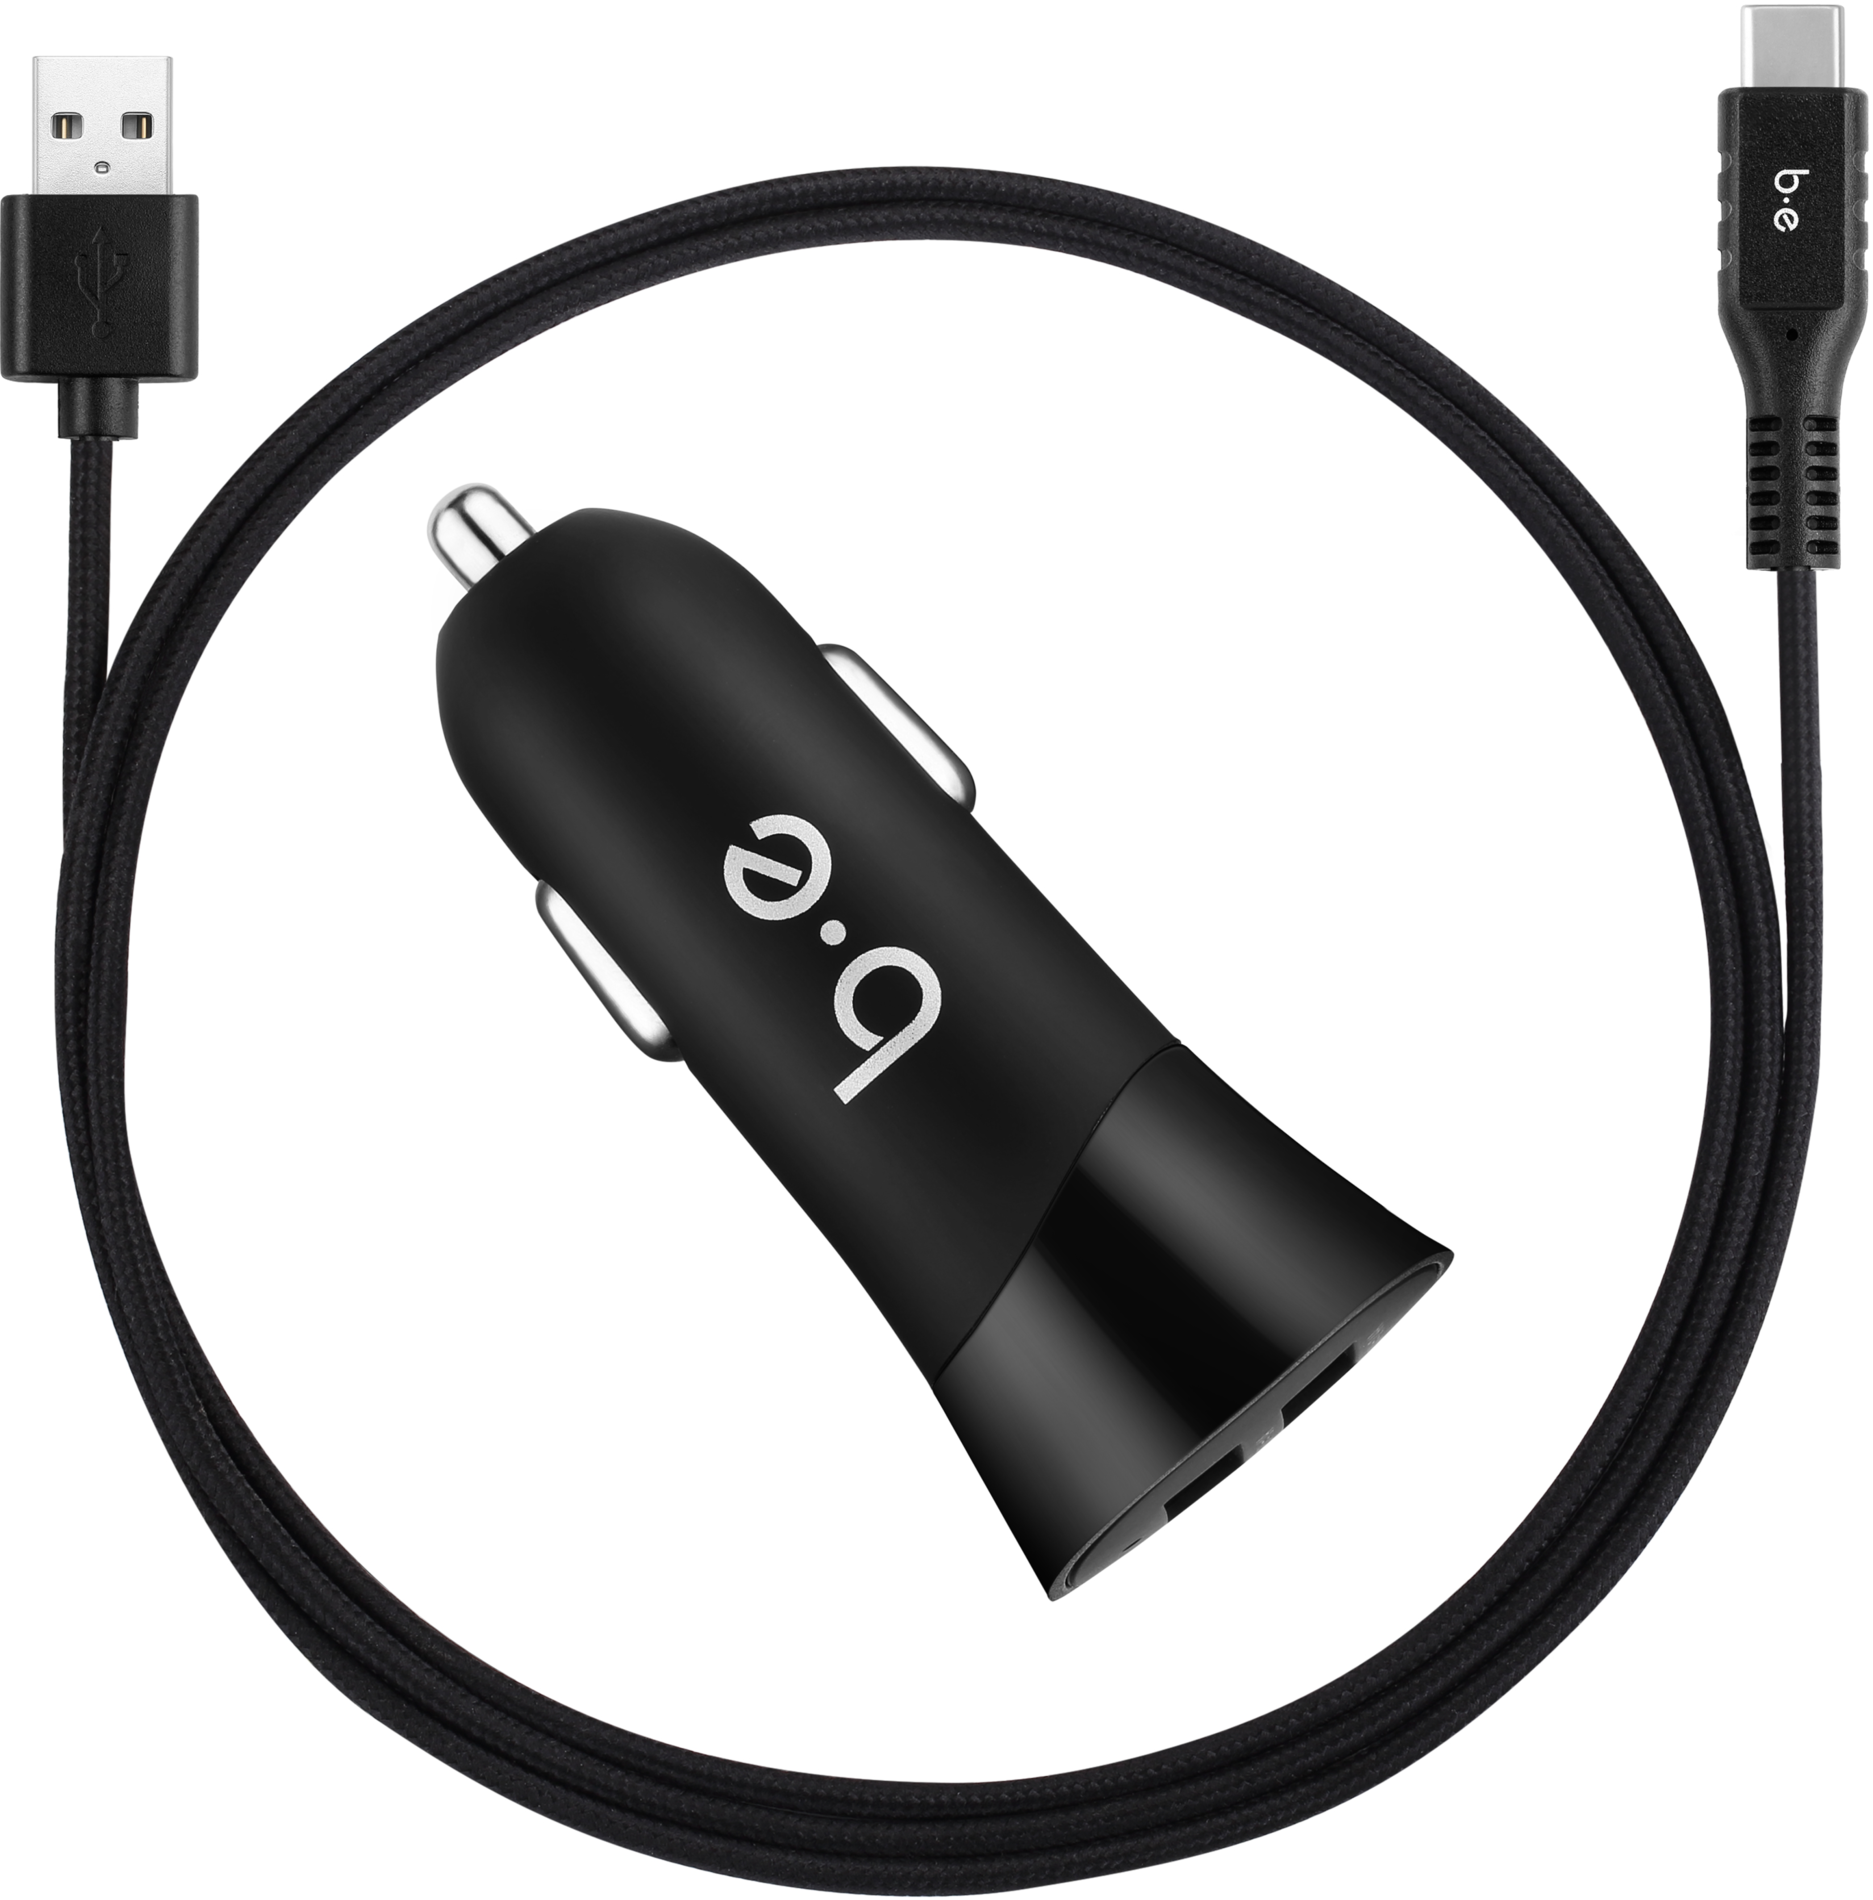 Dual USB 3.4A Car Charger w/ USB Type-C Cable